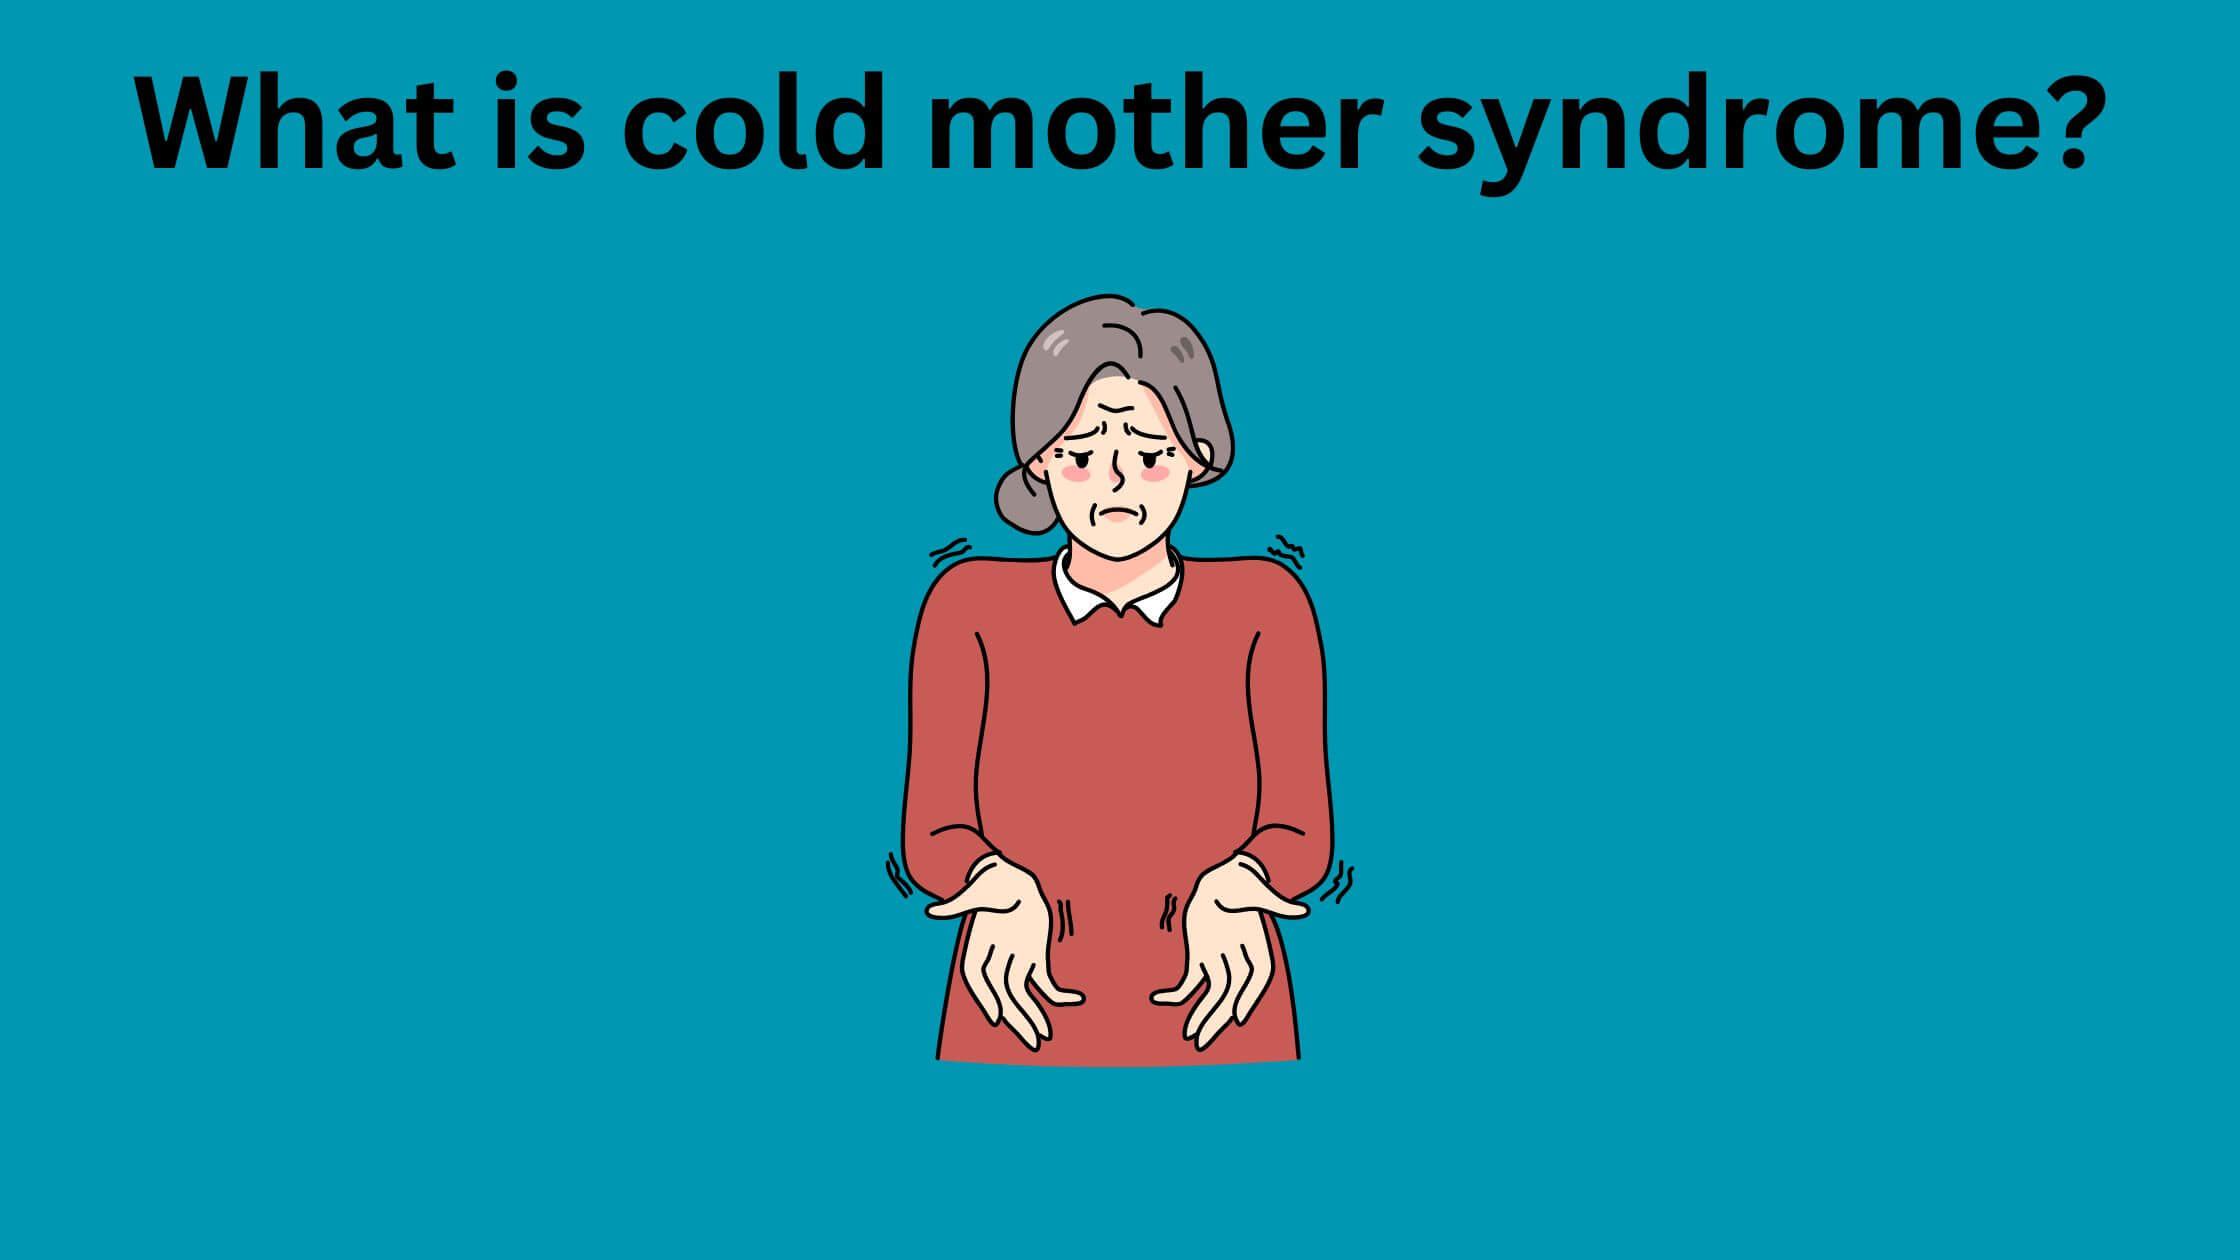 What is cold mother syndrome?